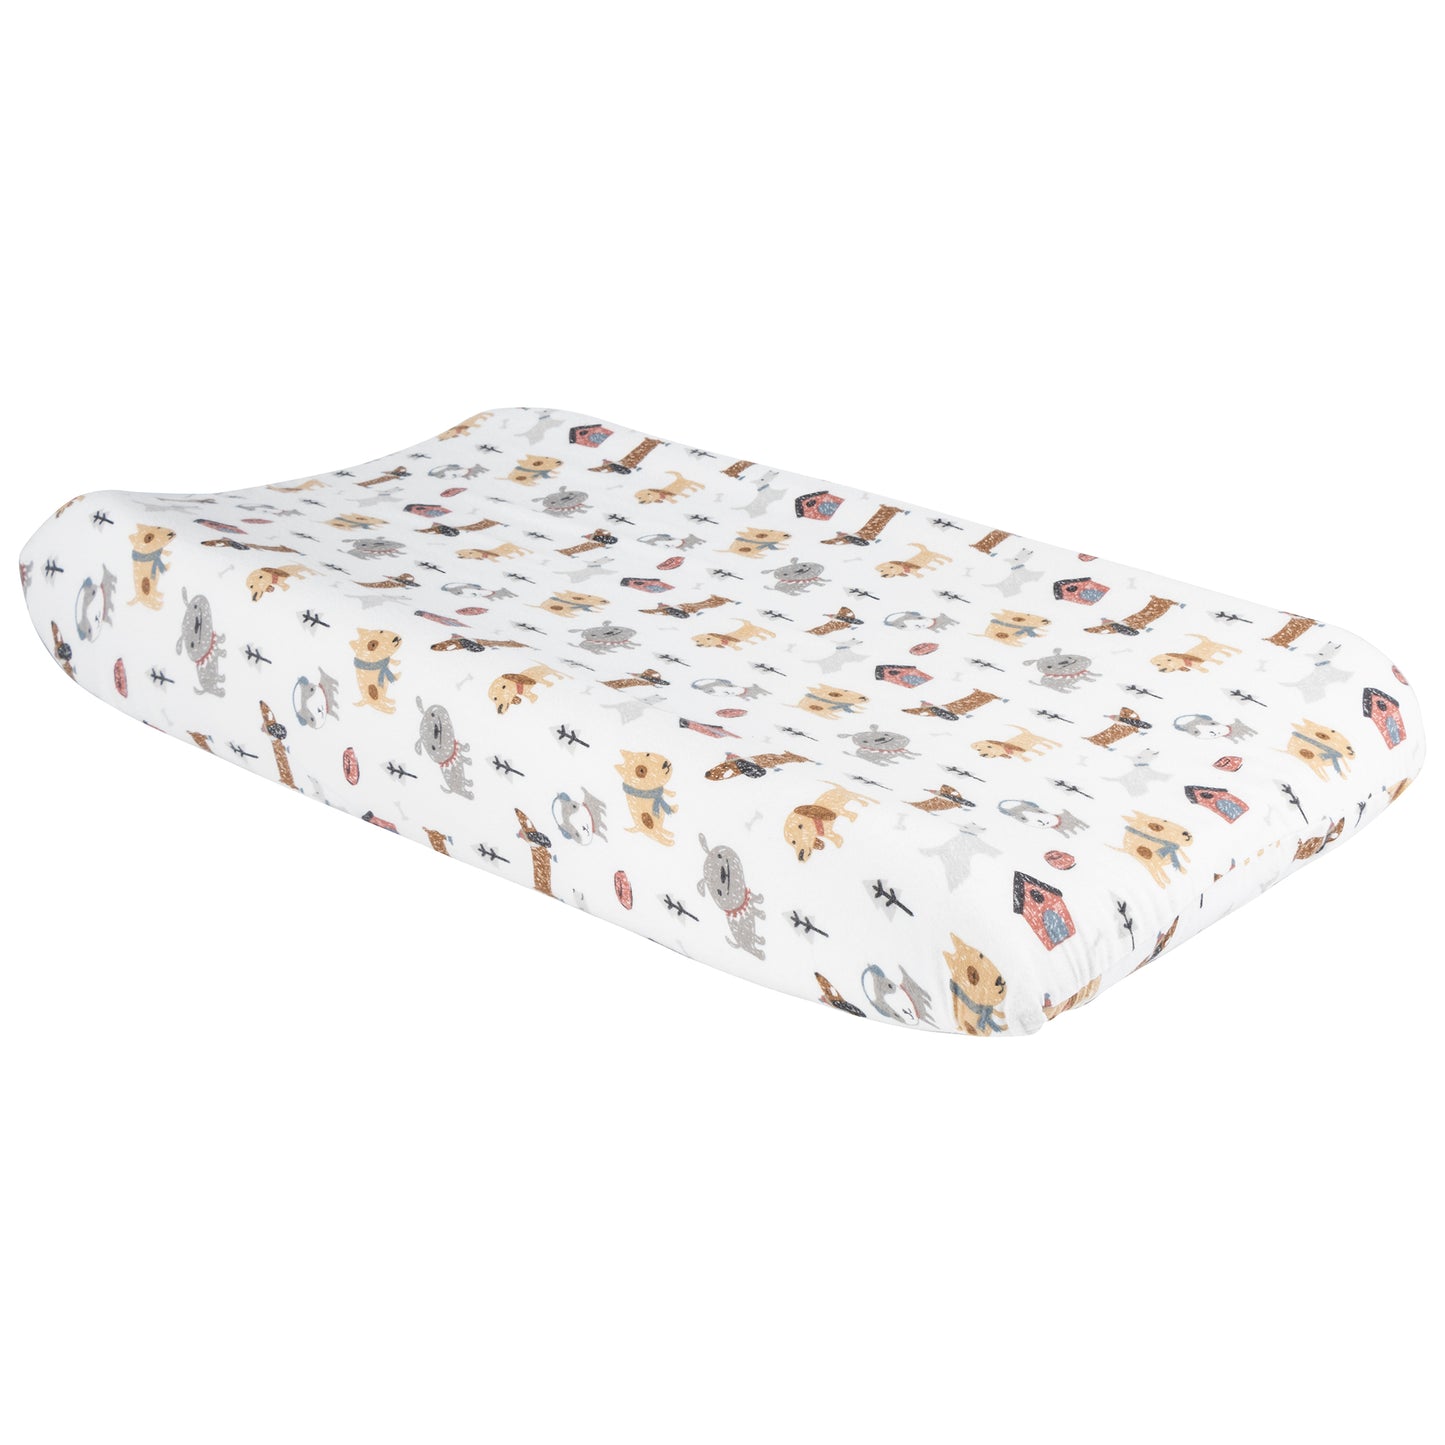 Dog Park Deluxe Flannel Changing Pad Cover featuring a sketched multi-breed puppy print with dog houses and bones in gray, red, light blue and a variety of browns on a white background